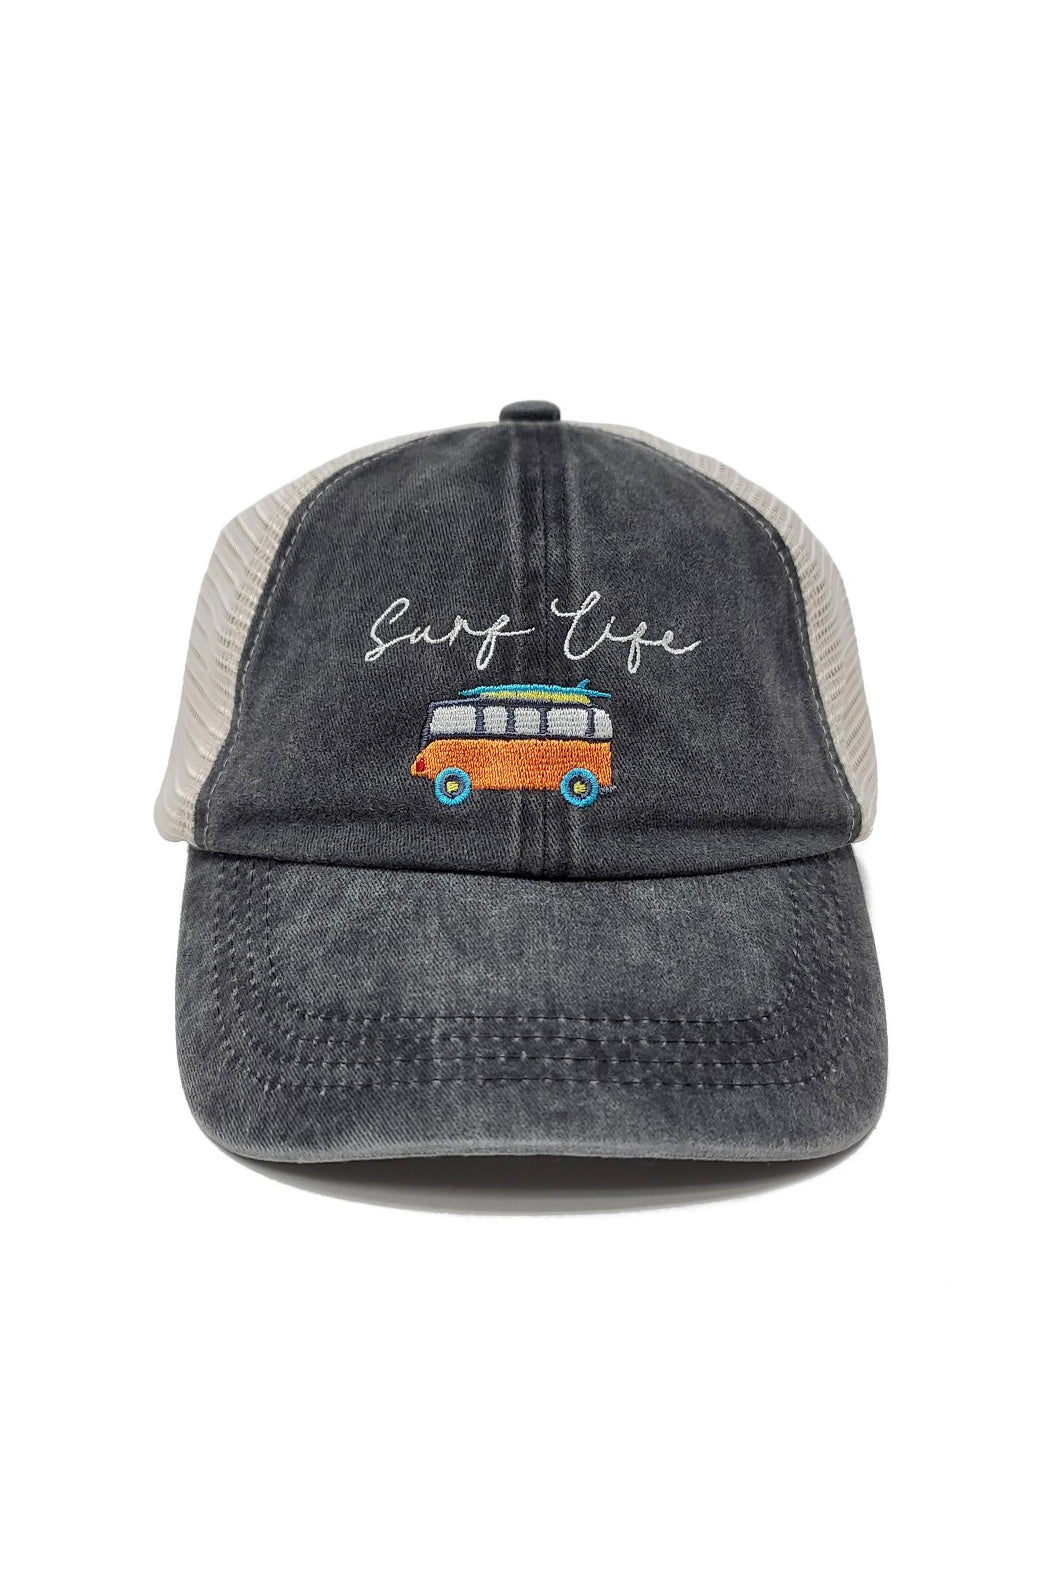 Surf Life Embroidered Trucker Cap